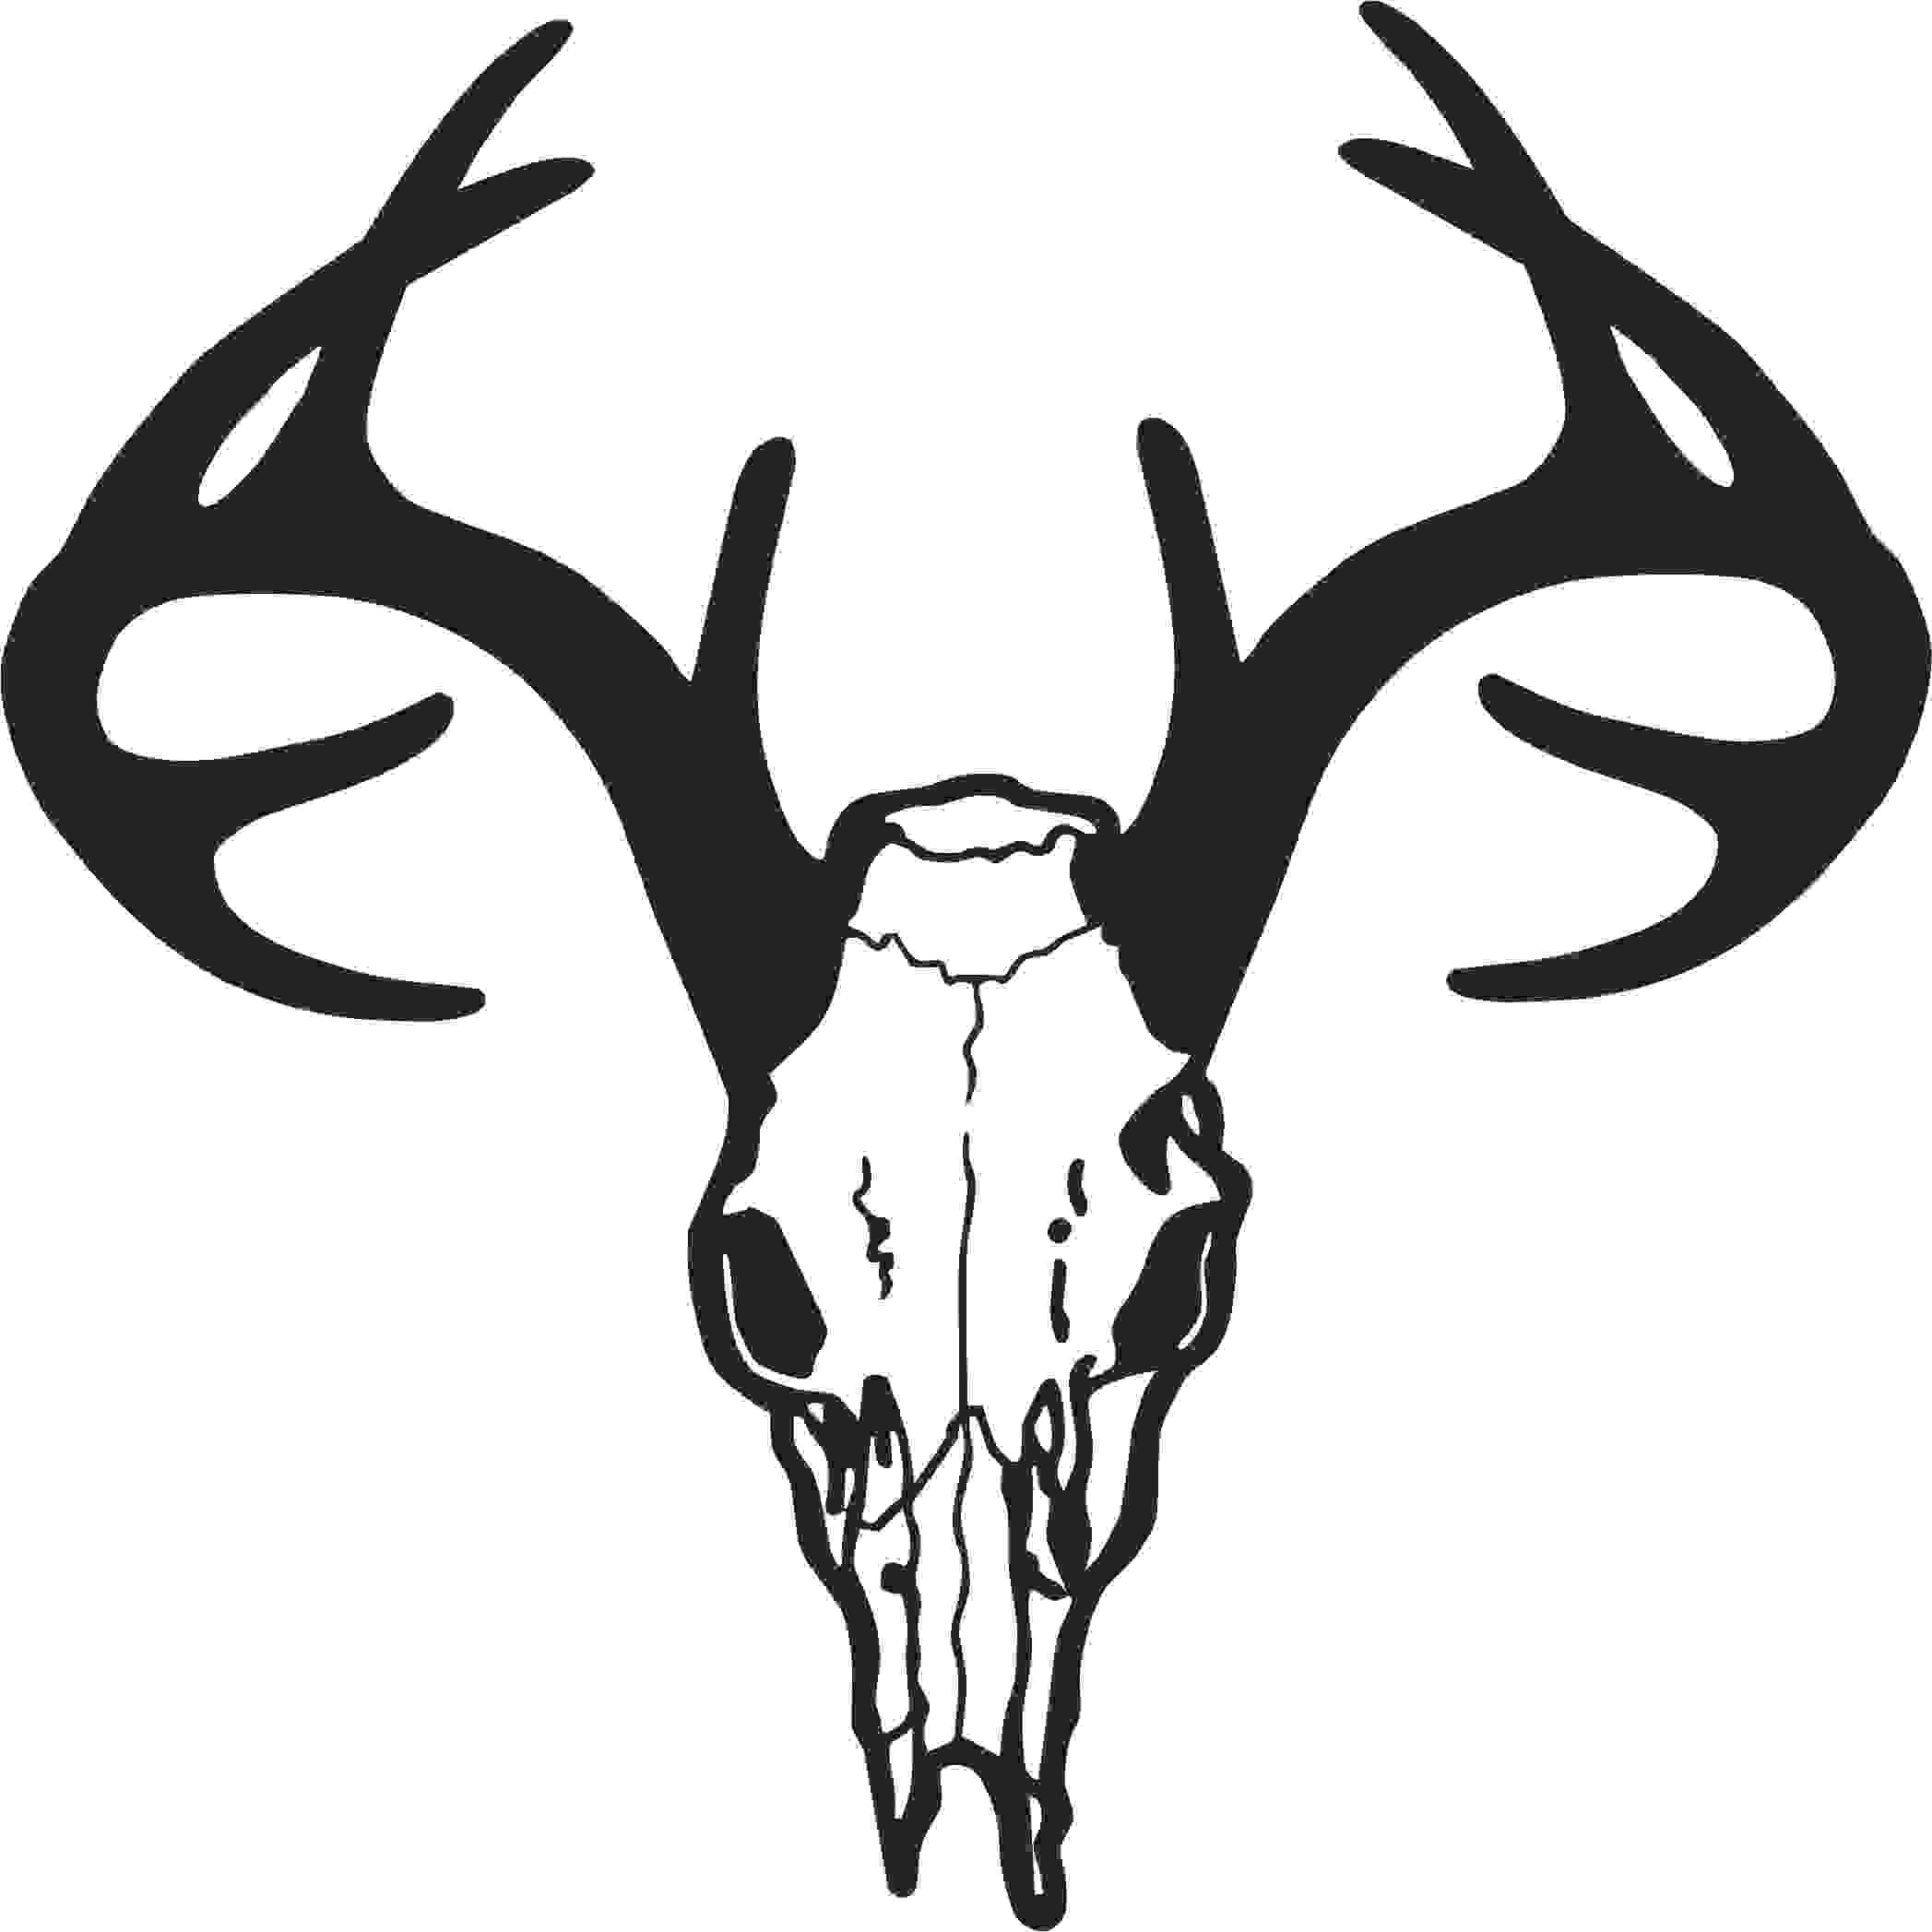 Skull Drawing Black Background This is Best Deer Skull Clip Art 14201 Deer Skull Drawing Free